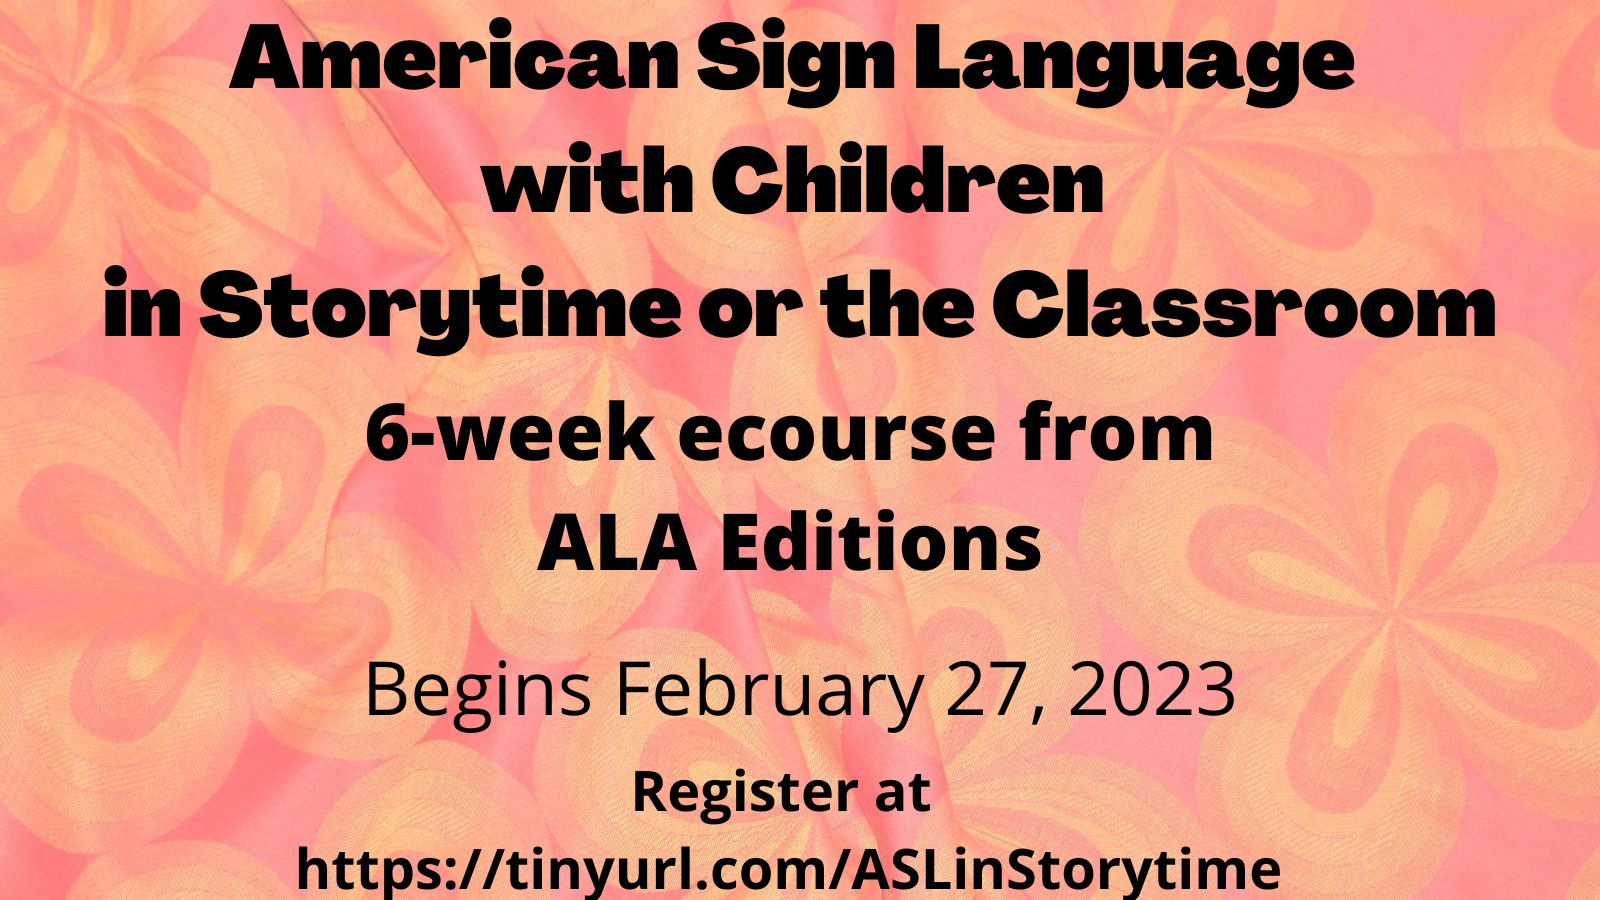 text appears against an orange flowered background and reads: American Sign Language with Children in Storytime or the Classroom. 6-week ecourse from ALA Editions. Begins February 27, 2023. Register at https://tinyurl.com/ASLinStorytime 